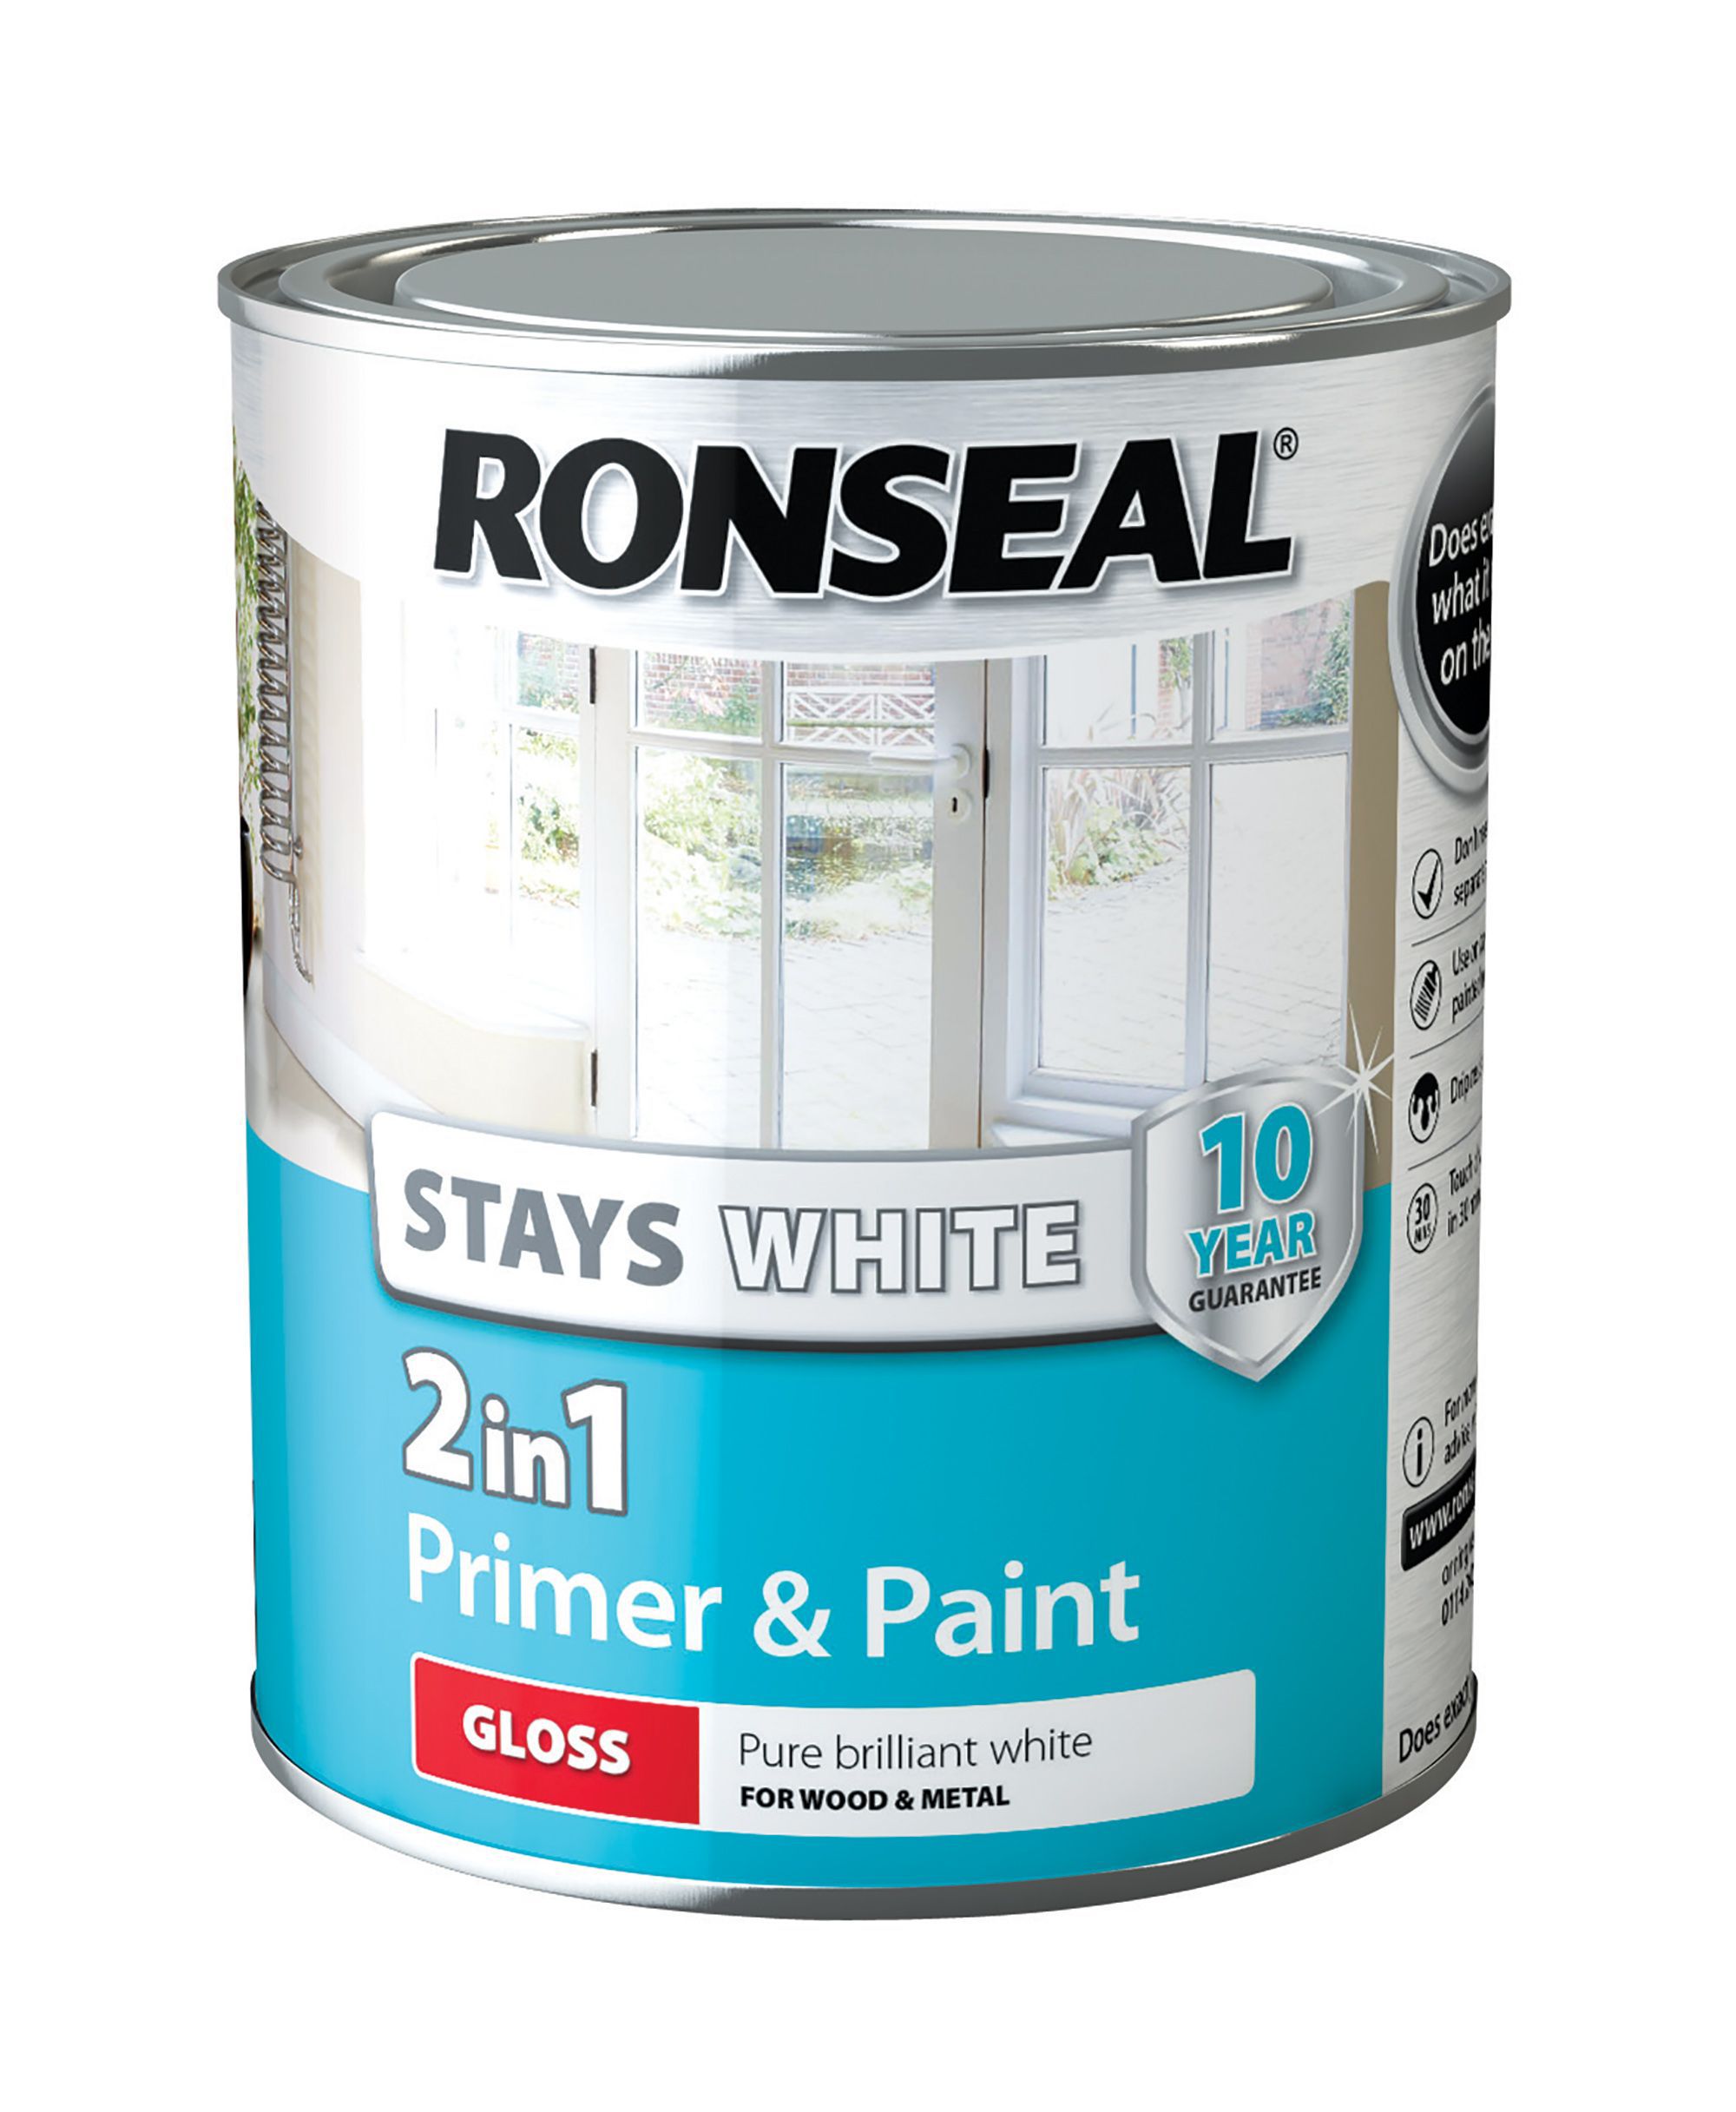 SKIP20A RON PAINT 2 IN 1 STAYS WHITE GLS